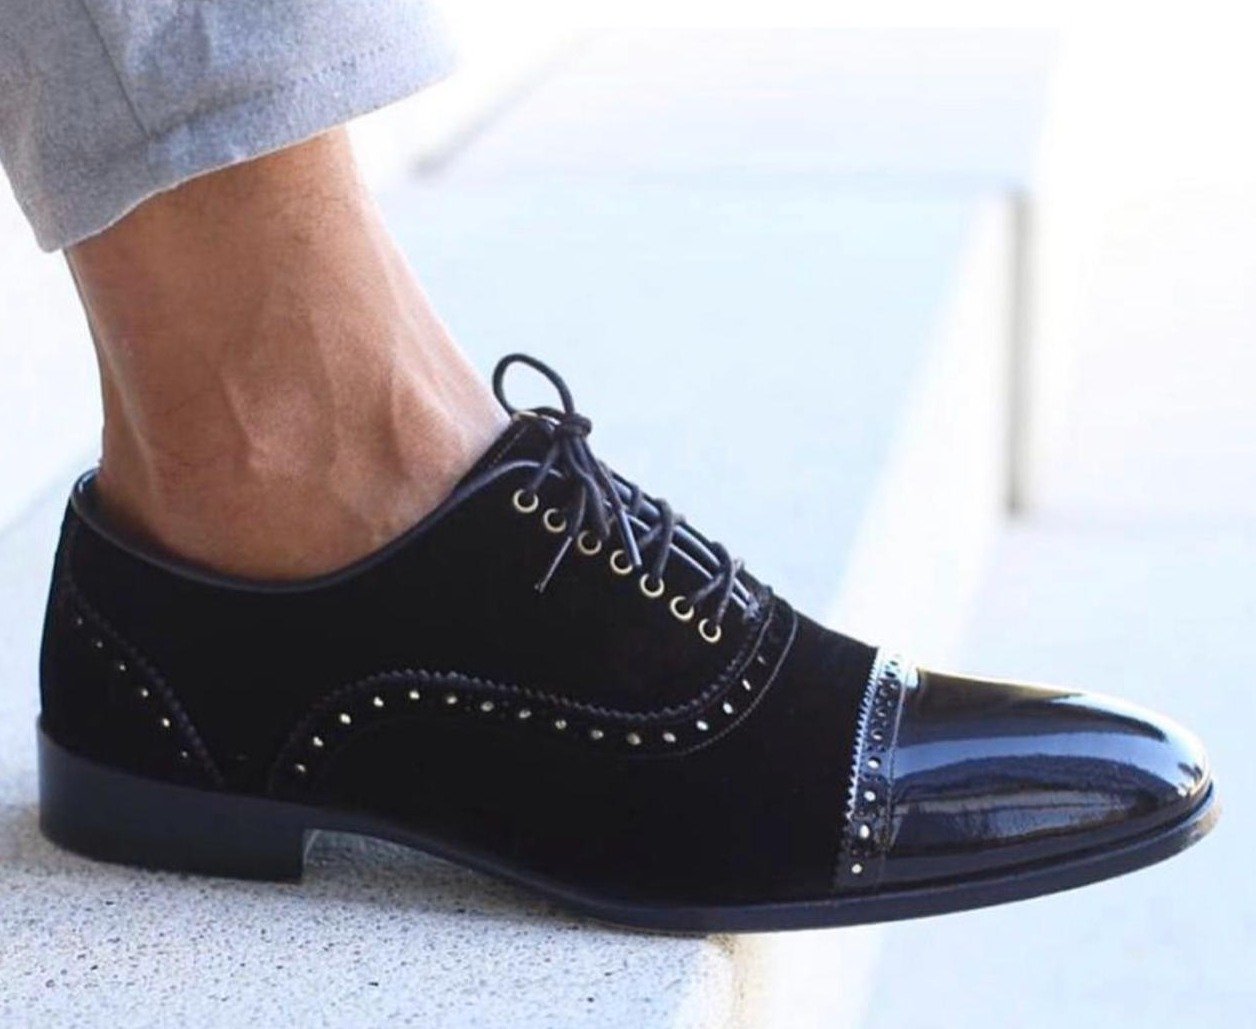 Stylish Casual And Party Wear Shoes For Men-Unique and Classy